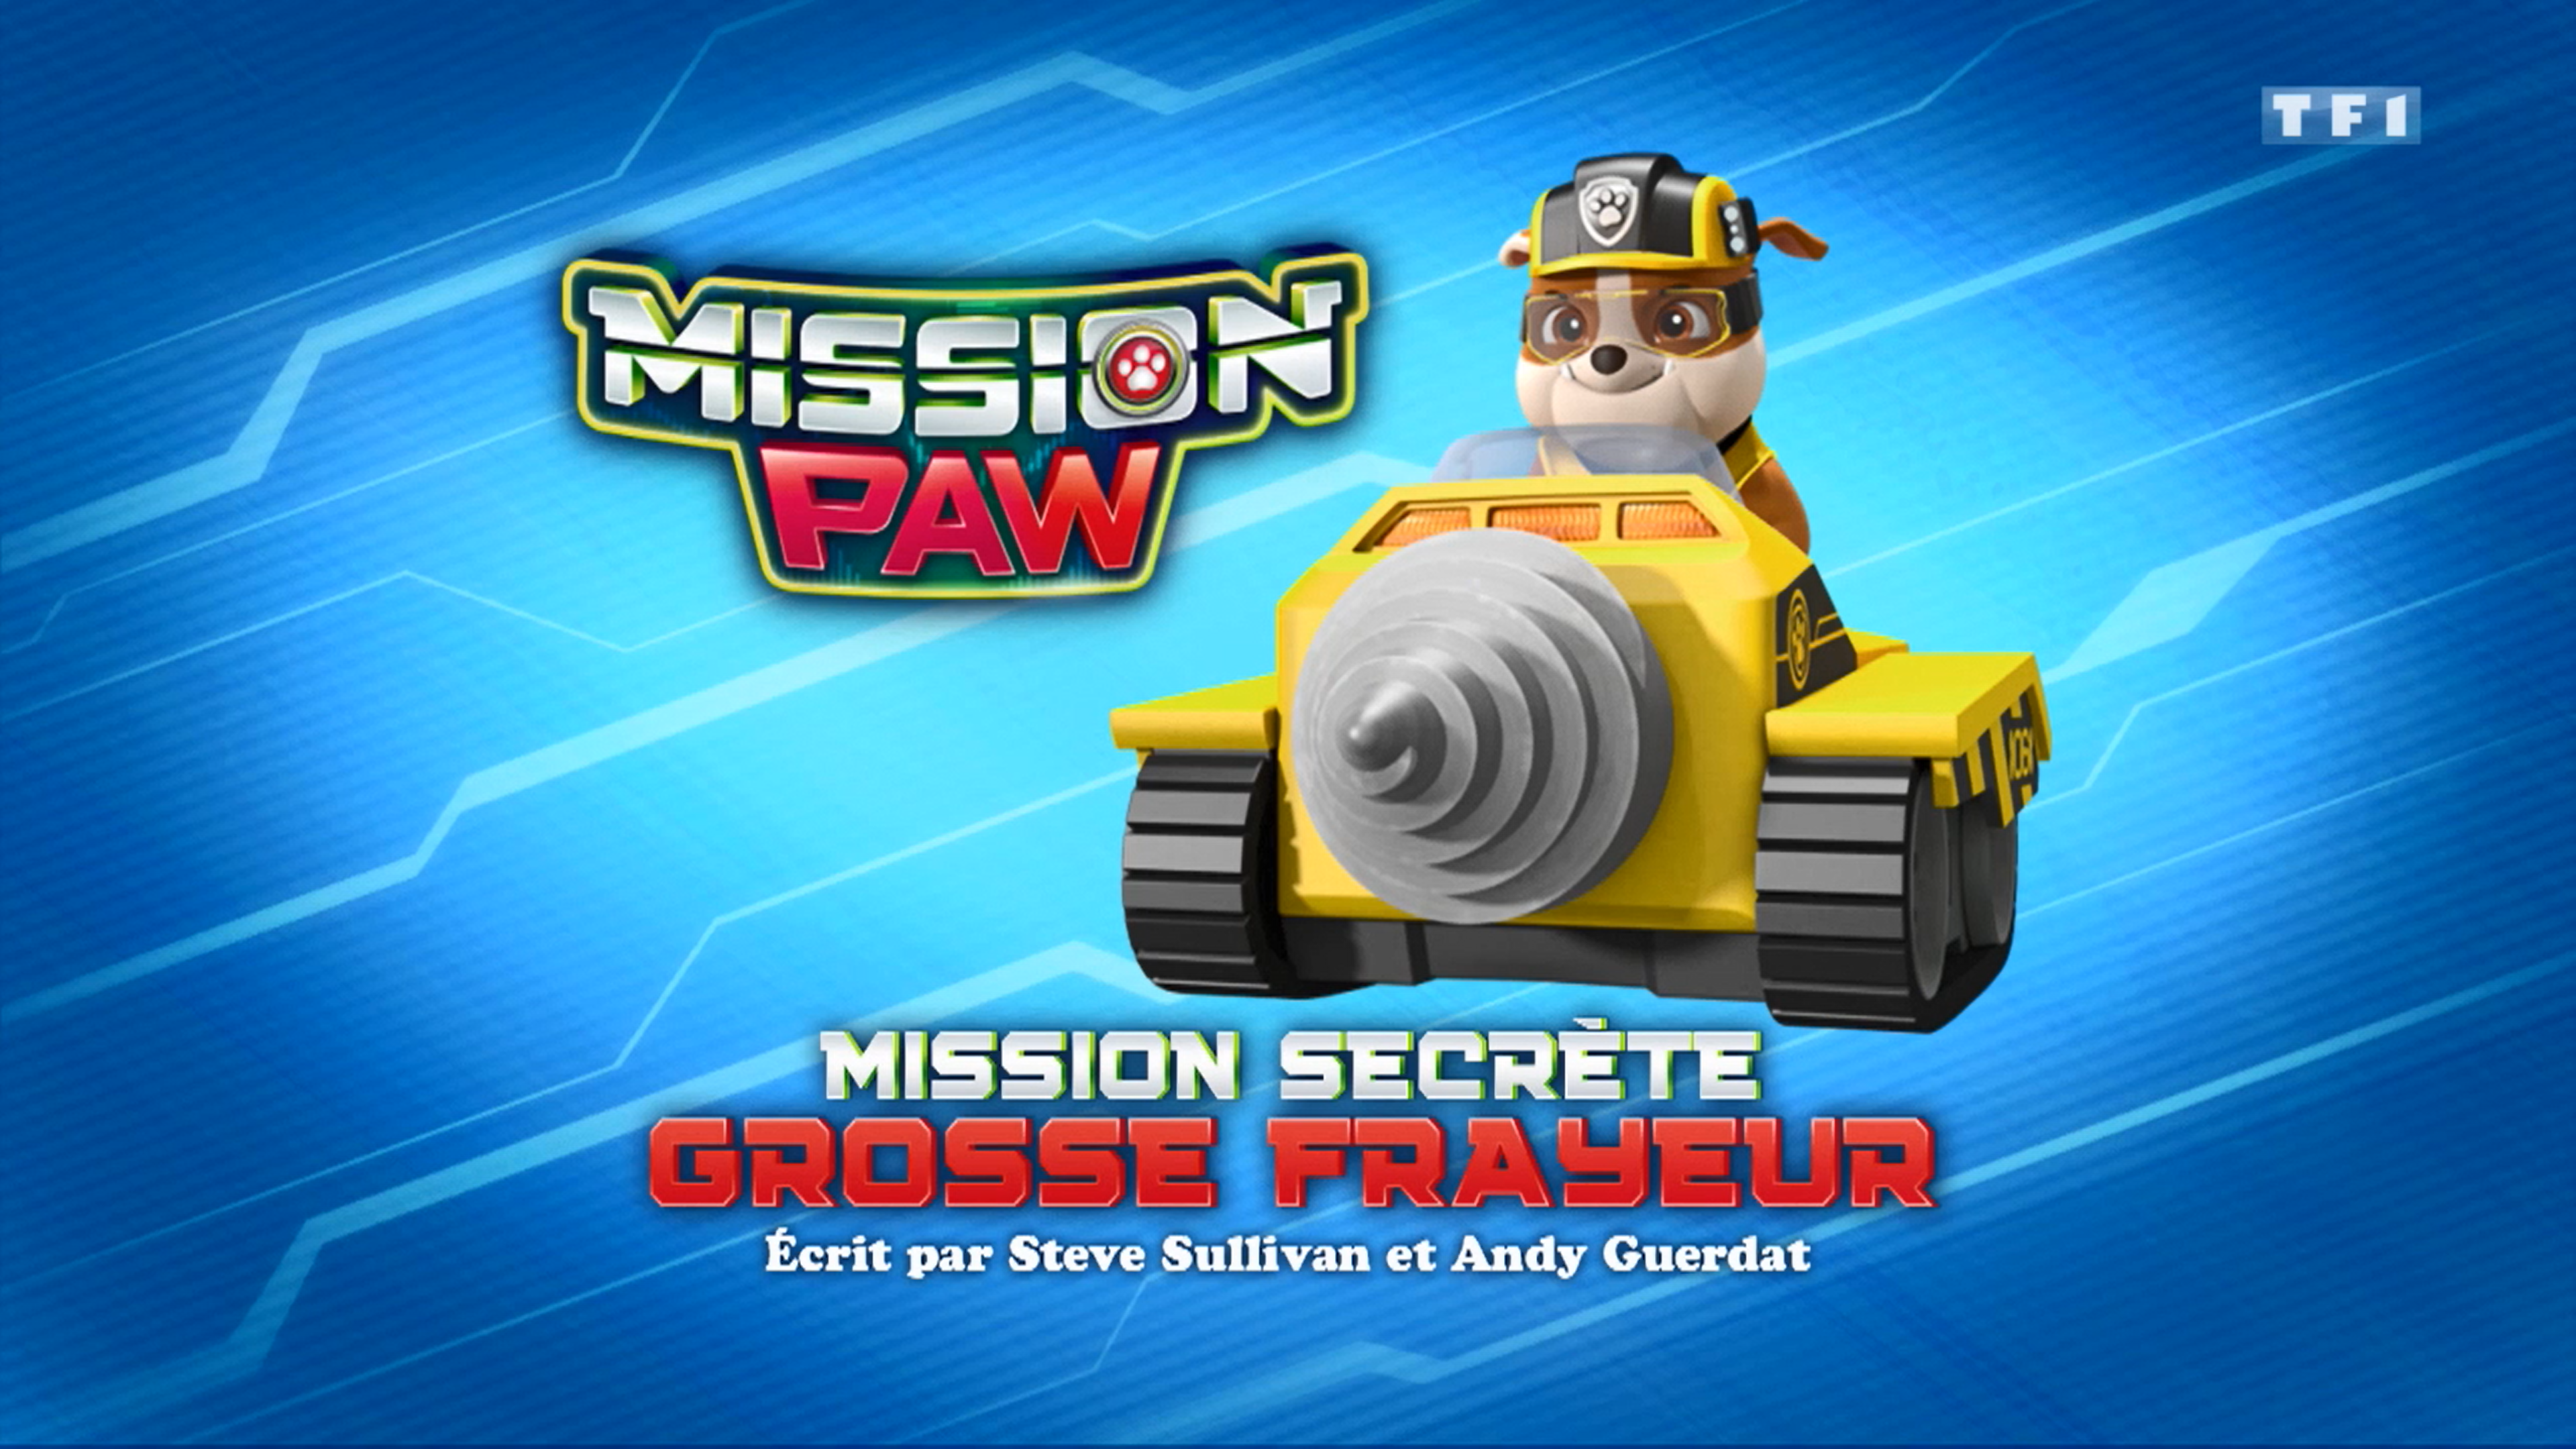 Aktiver indlogering teenagere Mission PAW: Royally Spooked | PAW Patrol Wiki | Fandom